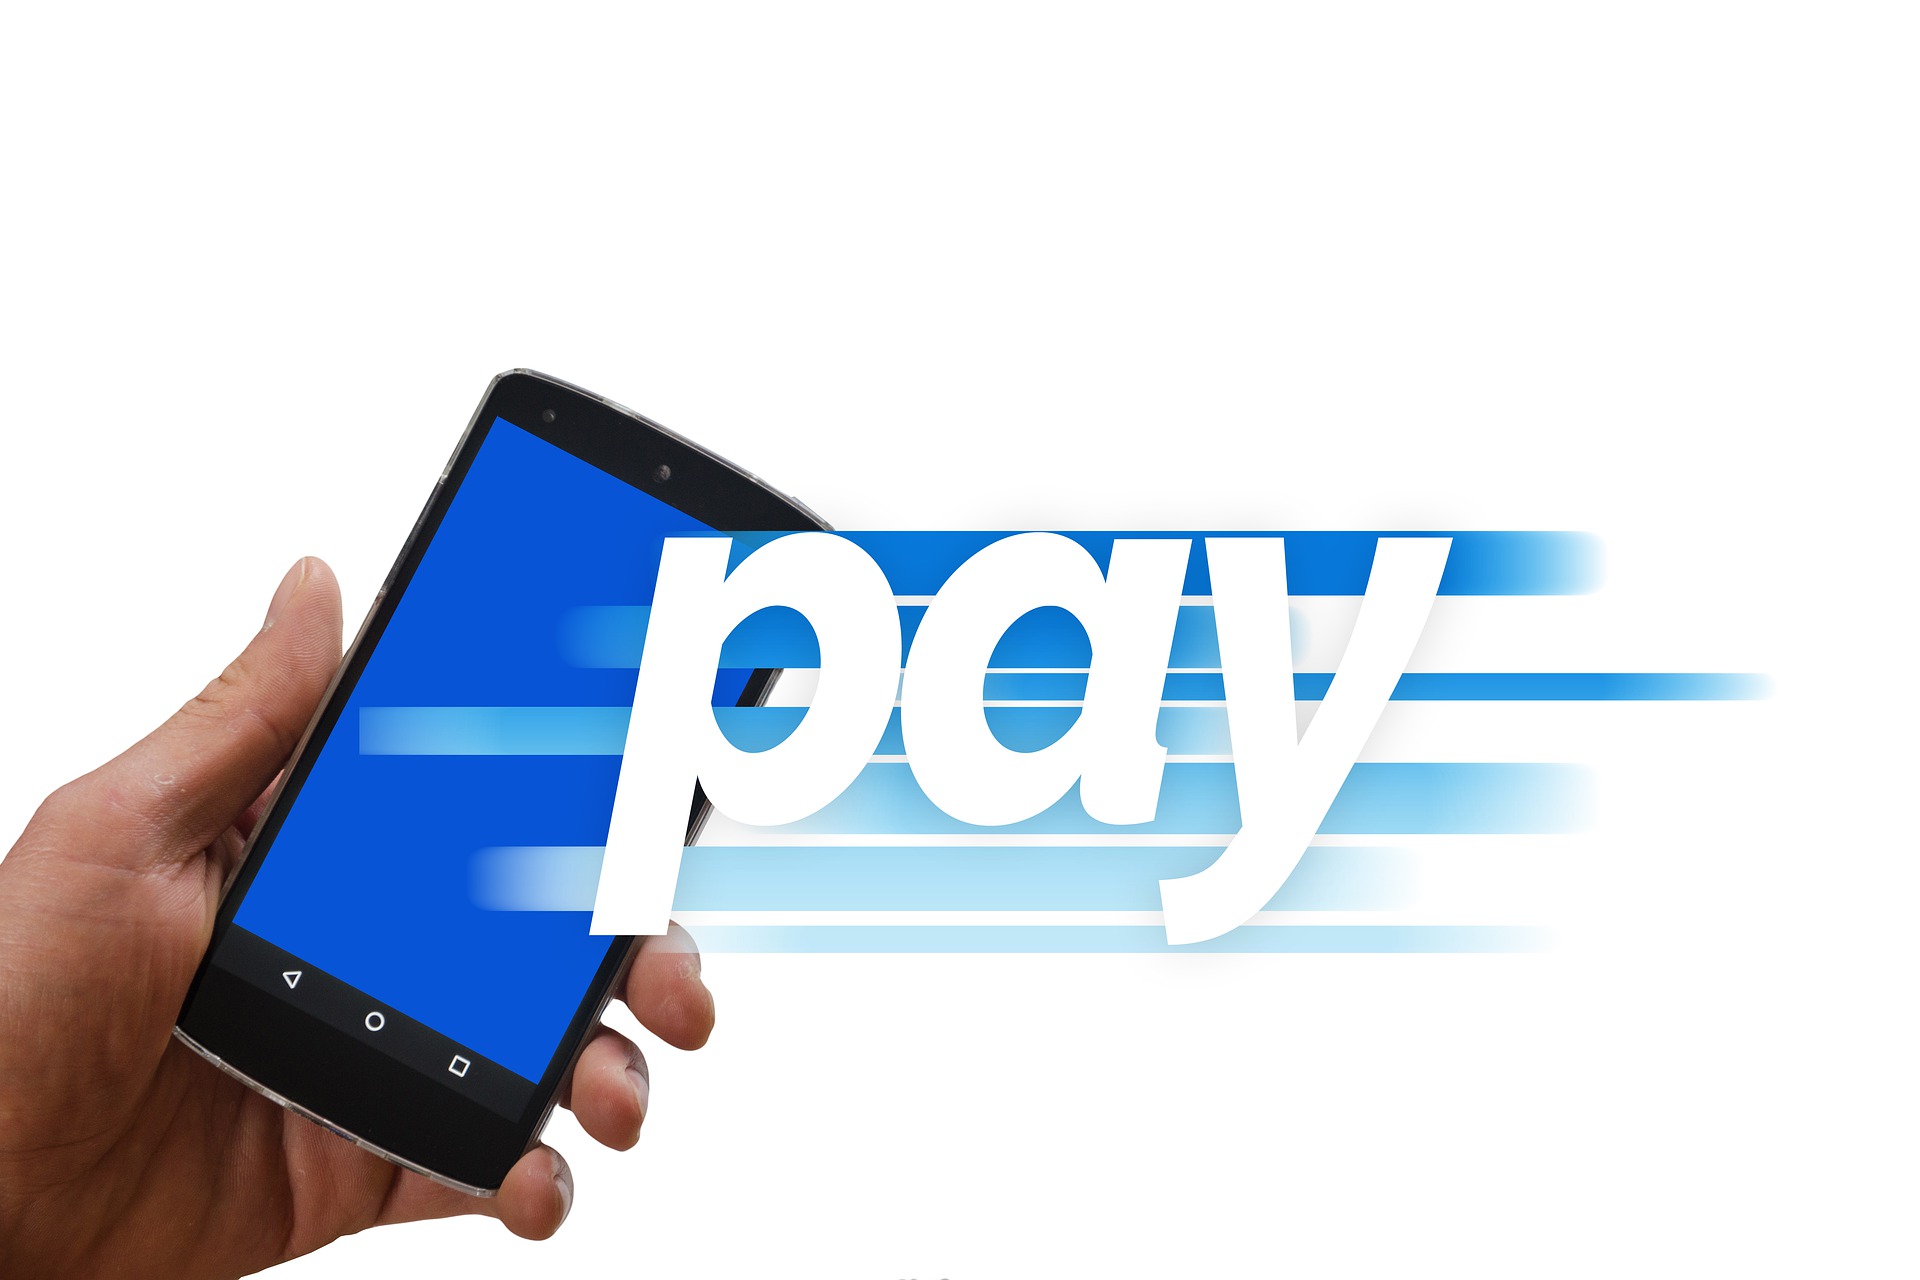 Google Pay’s NFC based Card Payment option rolling out in India.